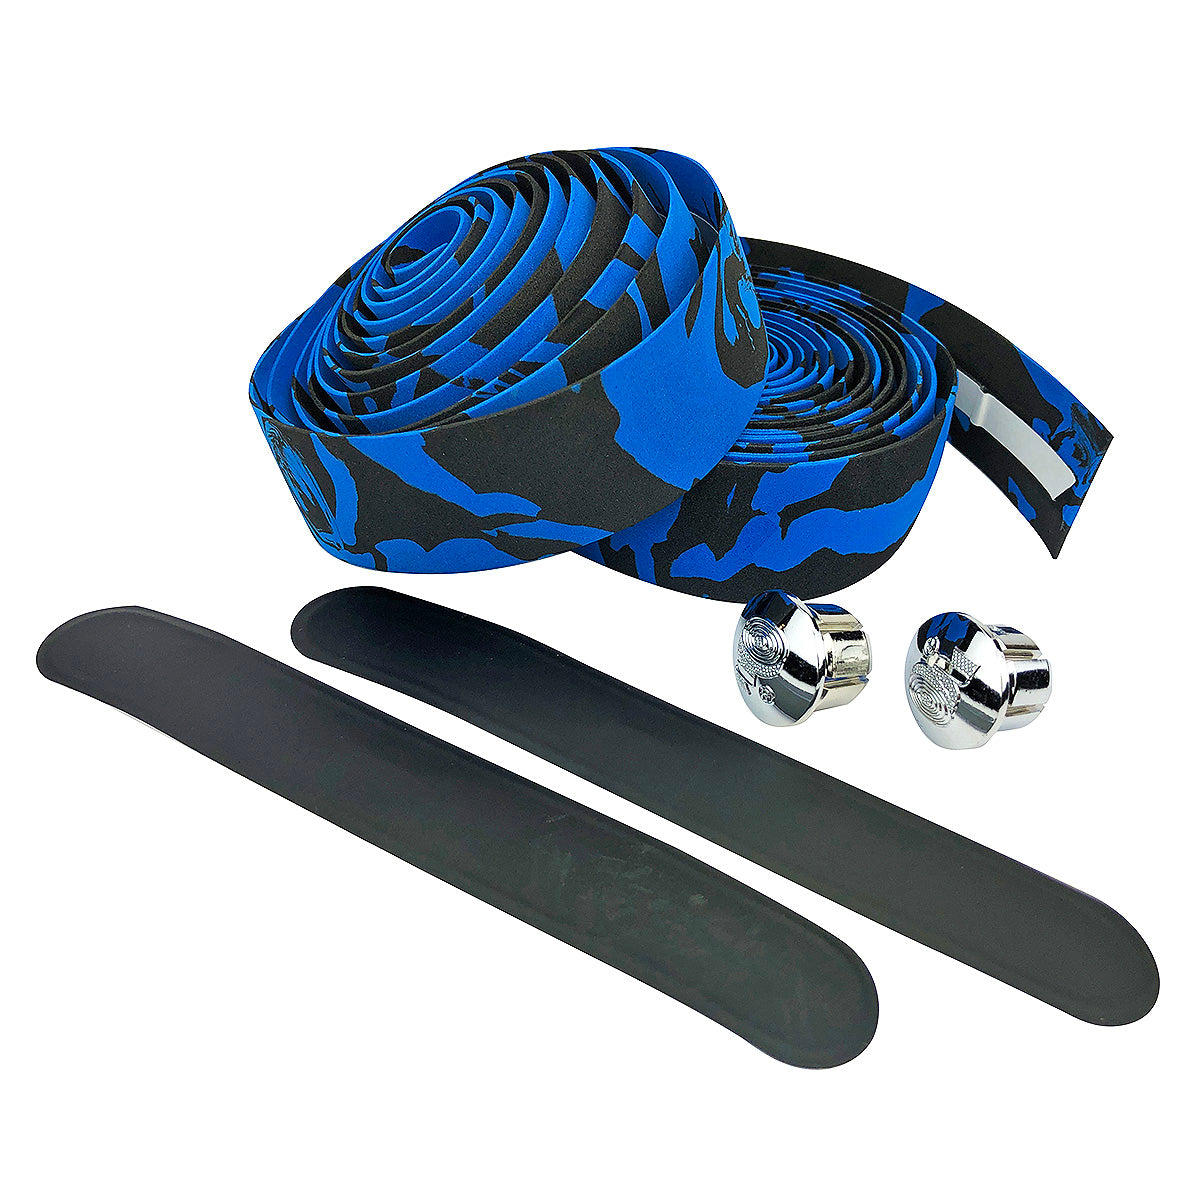 RNX Camouflage EVA Road Bike Handlebar Tape, Cycling Wraps w/ End Caps - Available in 3 Camo Colors